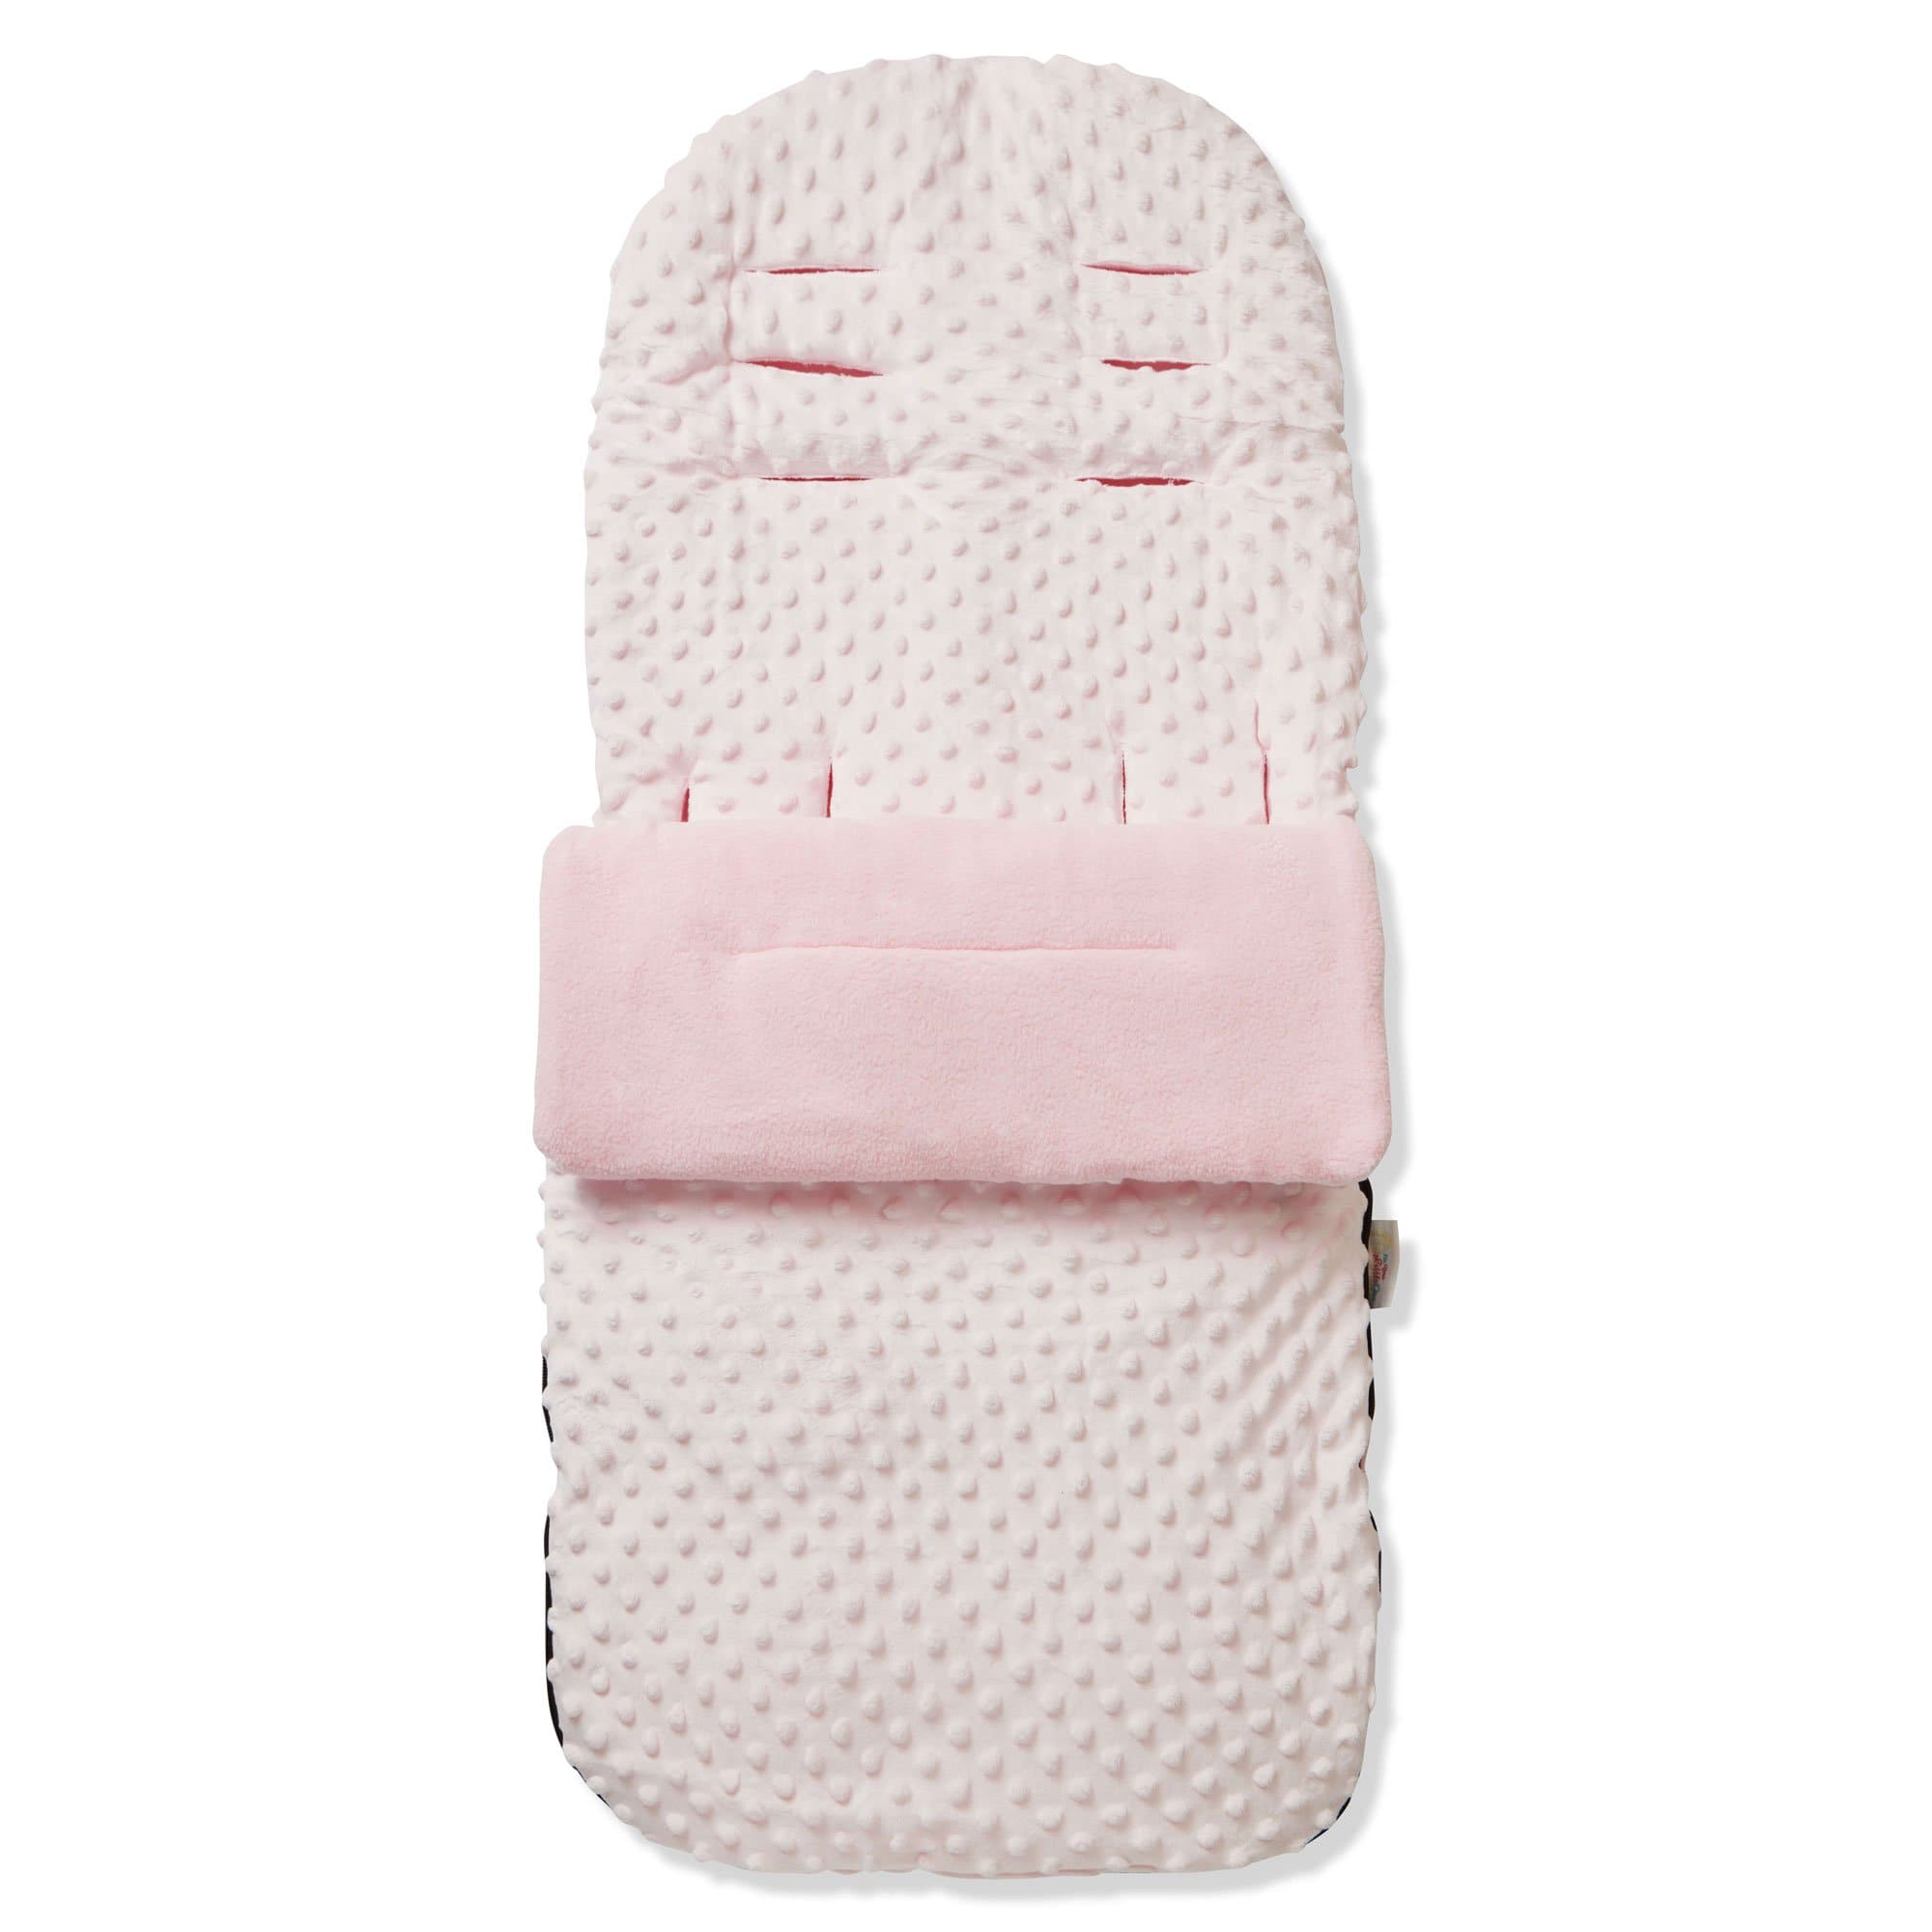 Dimple Footmuff / Cosy Toes Compatible with Mountain Buggy - Pink / Fits All Models | For Your Little One